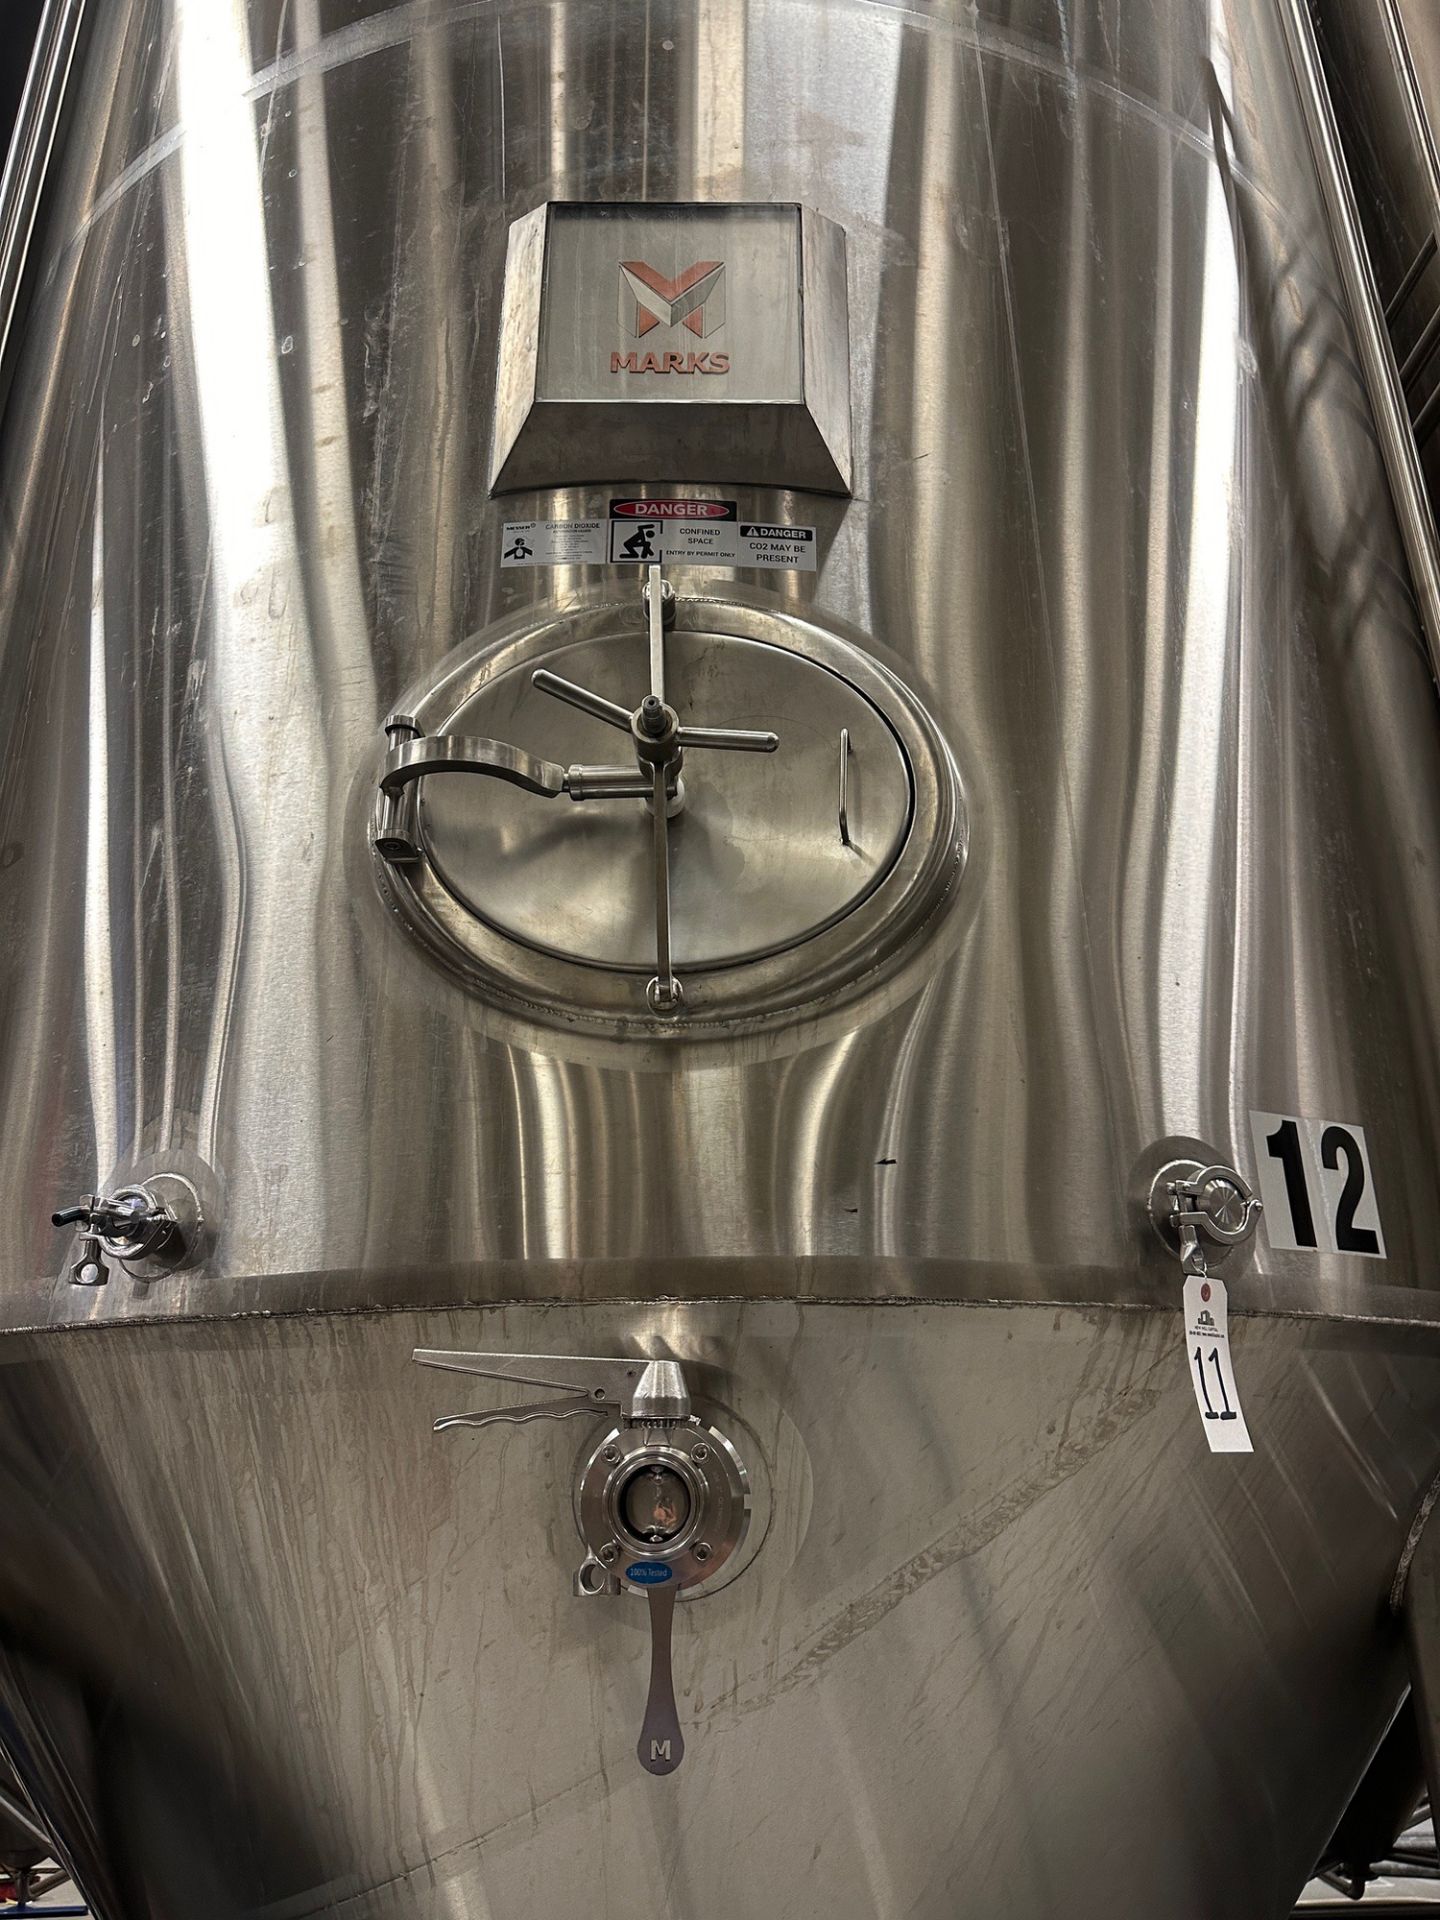 (1 of 8) 2020 Marks 132 BBL FV / 175 BBL or 5400 Gal Max Capacity Fermentation Tank | Rig Fee $2620 - Image 2 of 4